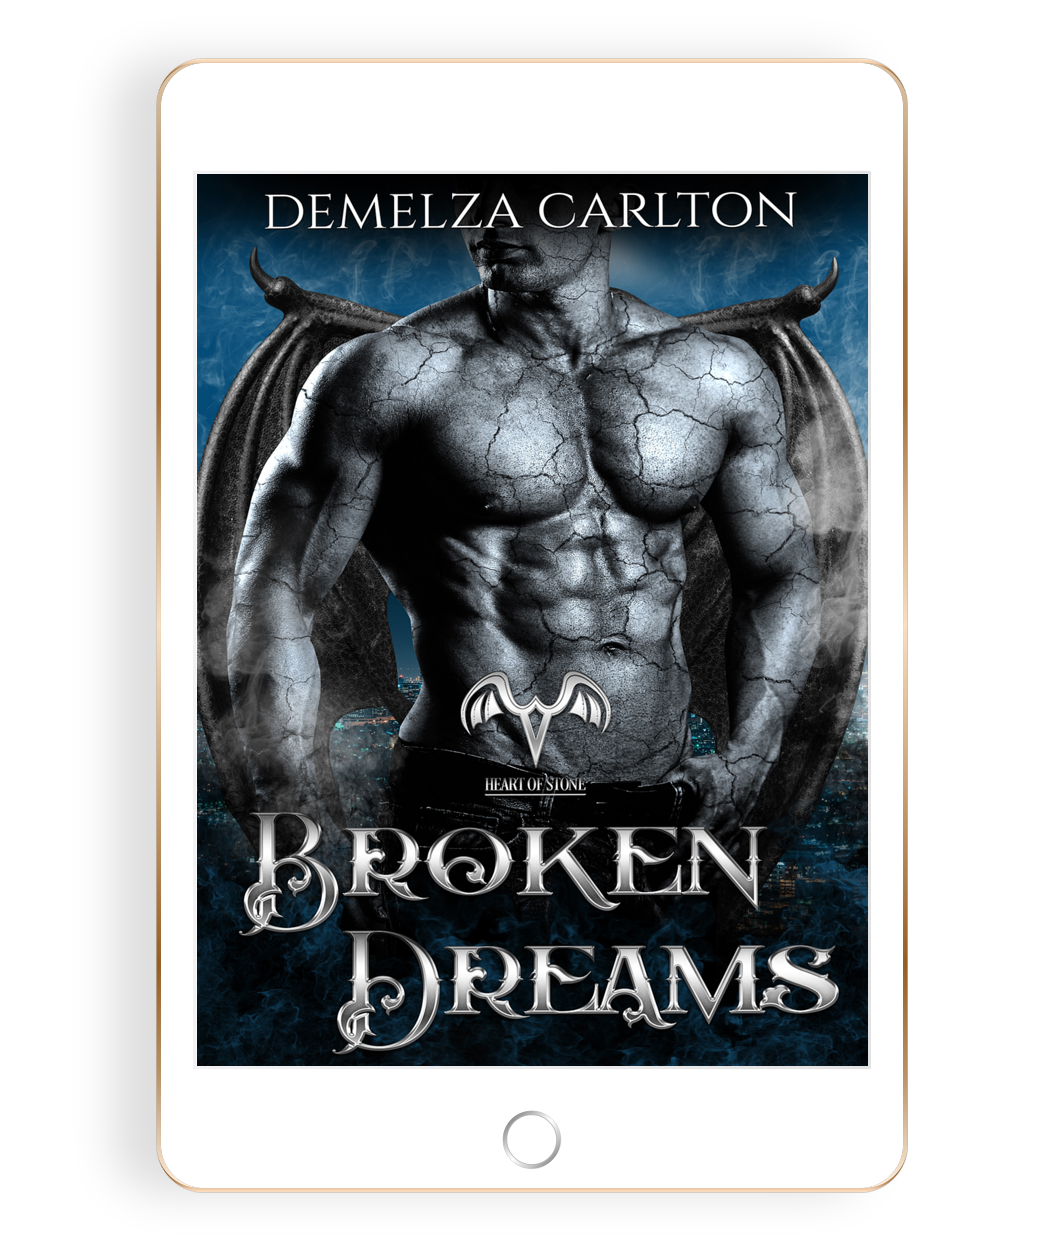 Broken Dreams: A Paranormal Protector Tale Book 3 in the Heart of Stone series by USA Today Bestselling Author Demelza Carlton ebook